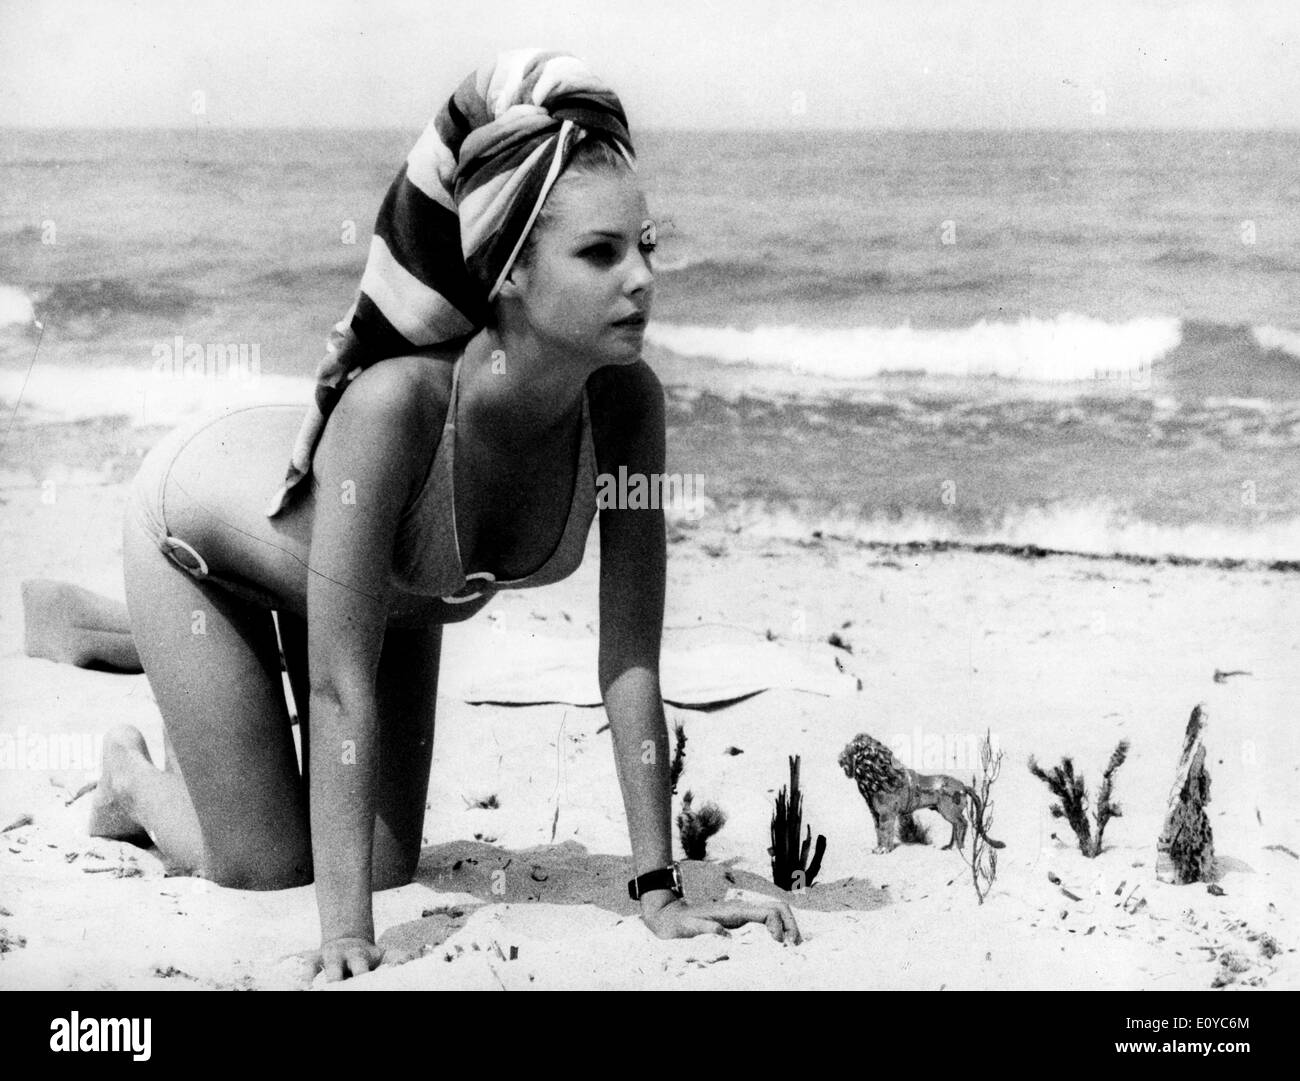 Oct 28, 1969; Sardinia, Italy; Sixteen year old CAROLE ANDRE co-stars with the swimmer turned actress Christine Caron in the film 'The Sea Lily' now in the making in Sardinia. The picture shows Carole Andre pictured in a scene on a beach. Stock Photo